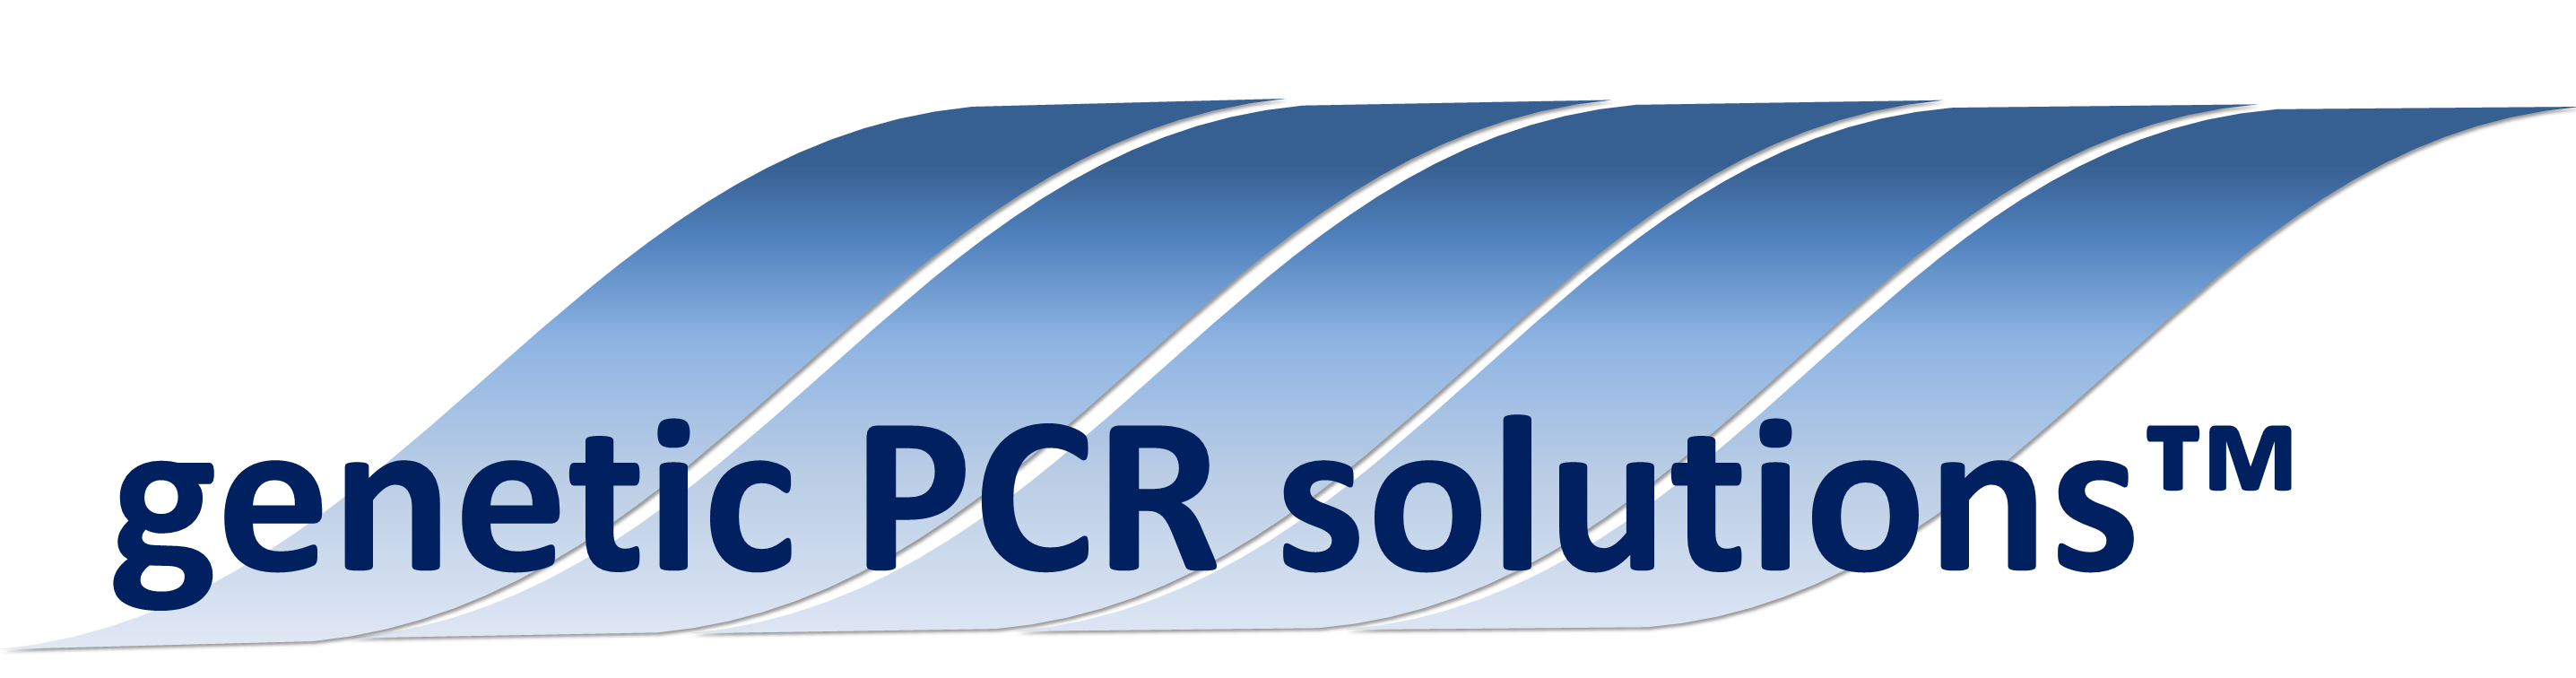 GENETIC PCR SOLUTIONS™